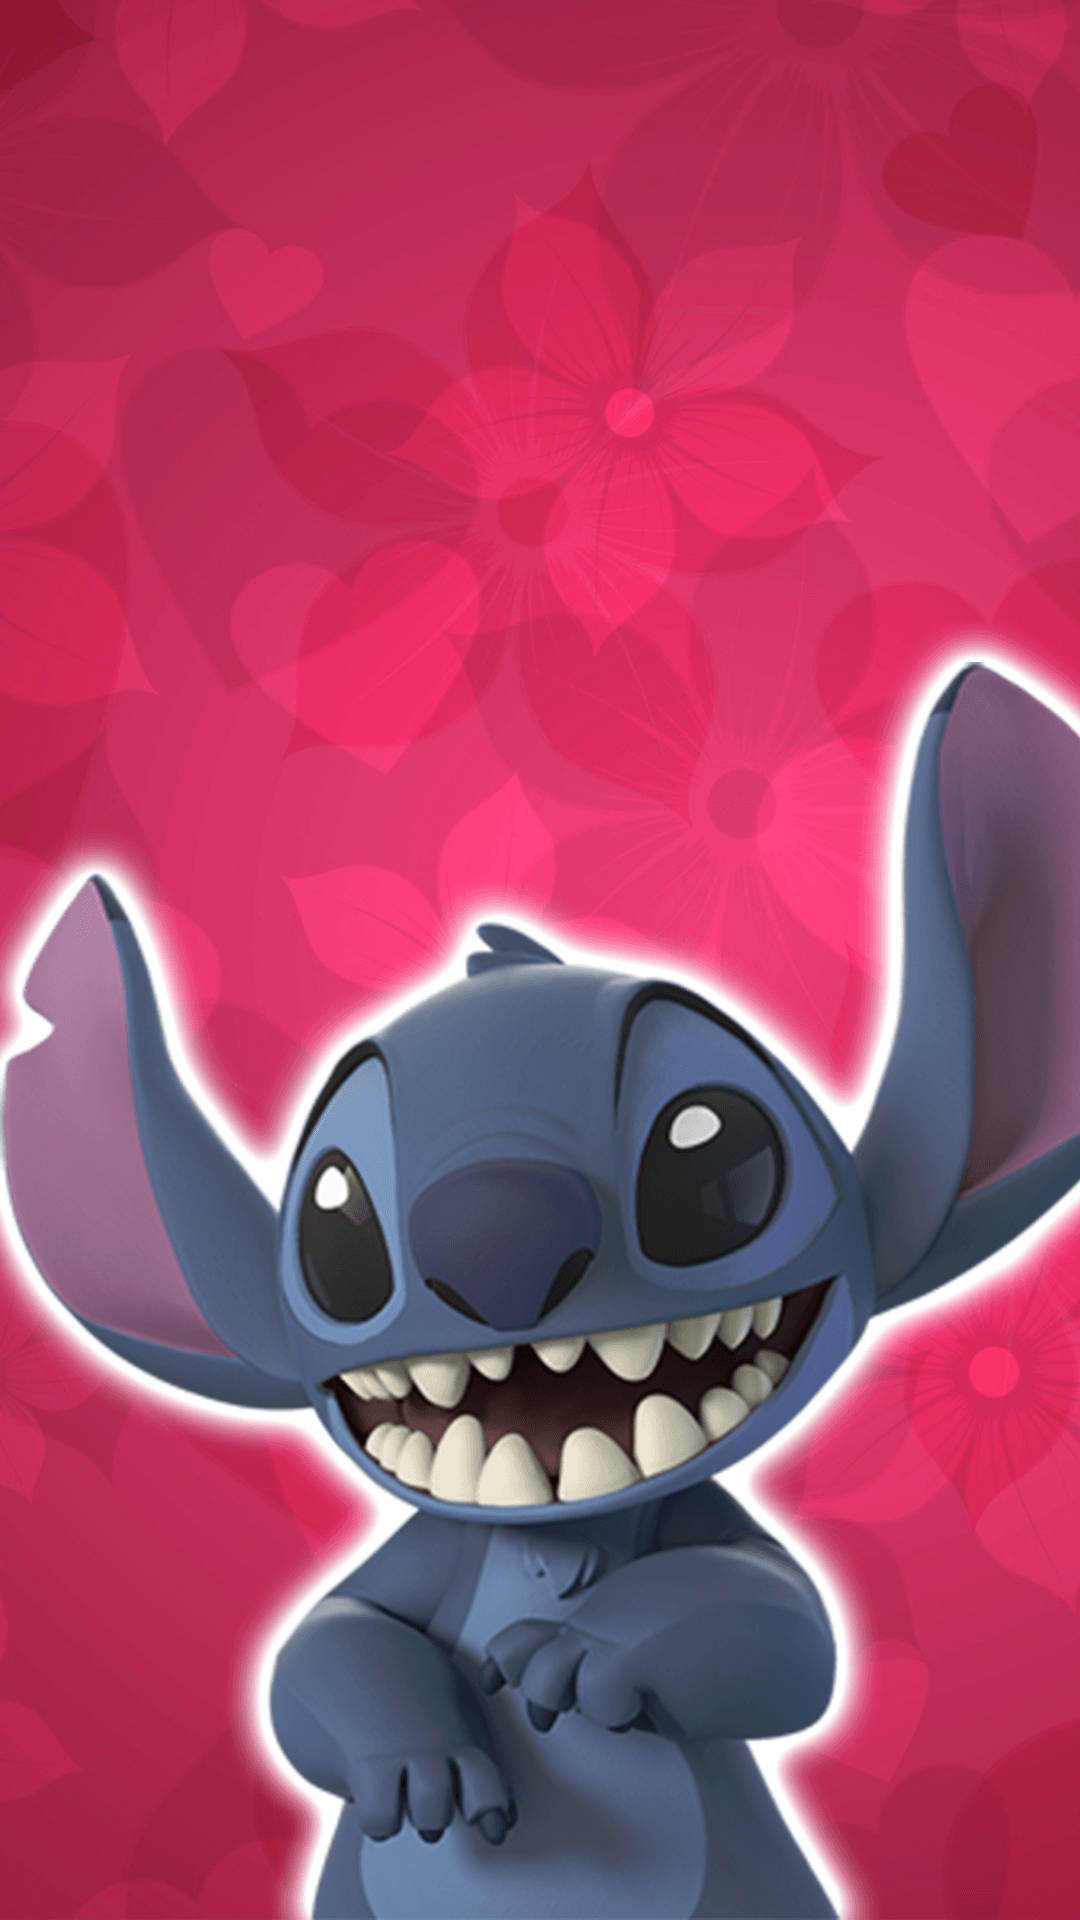 Free Stitch 3d Wallpaper Downloads, [100+] Stitch 3d Wallpapers for FREE |  